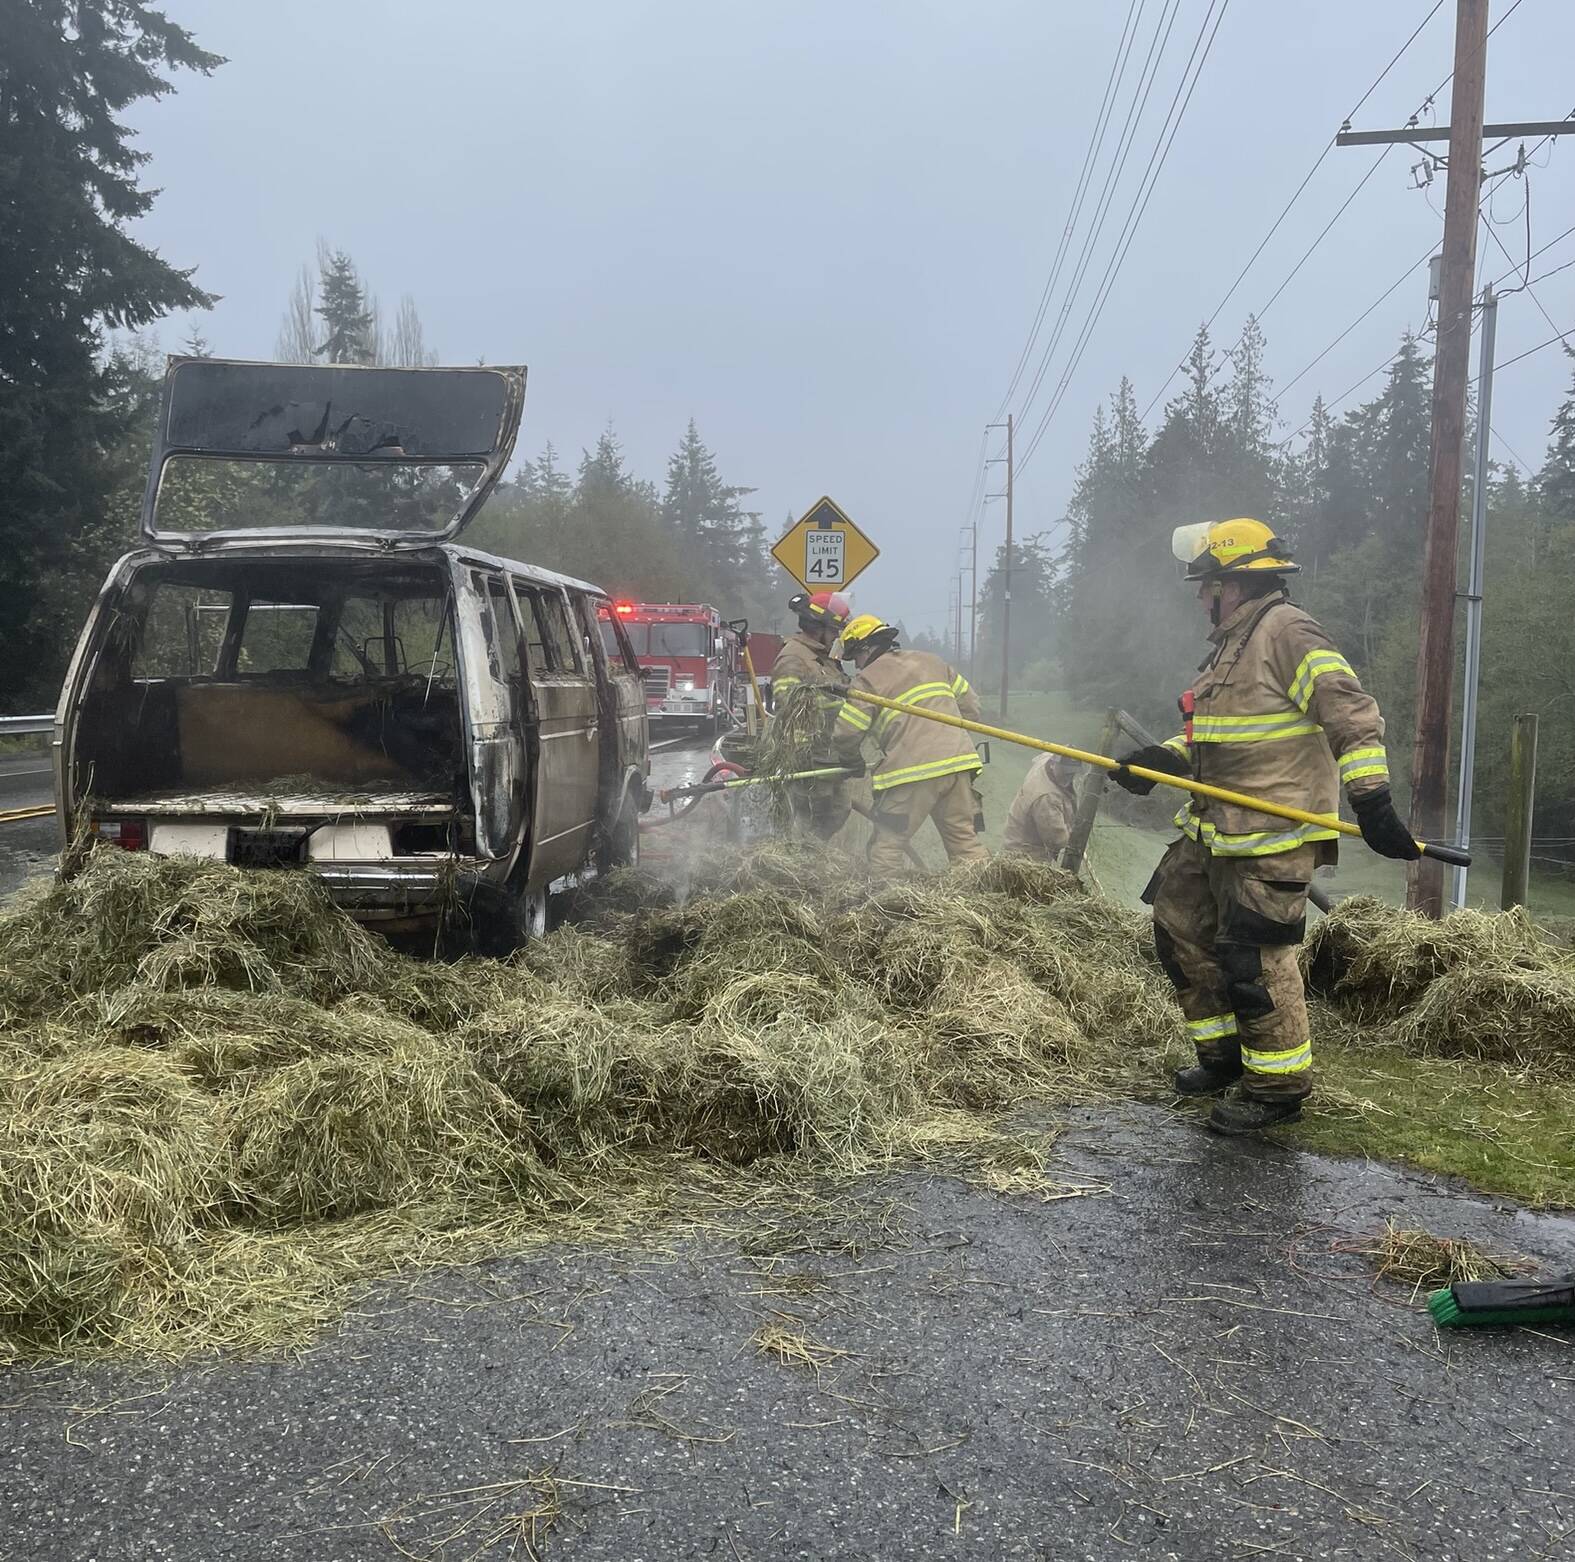 Photo provided by South Whidbey Fire/EMS
Firefighters had to remove all of the hay from the van in order to fully extinguish the vehicle fire.